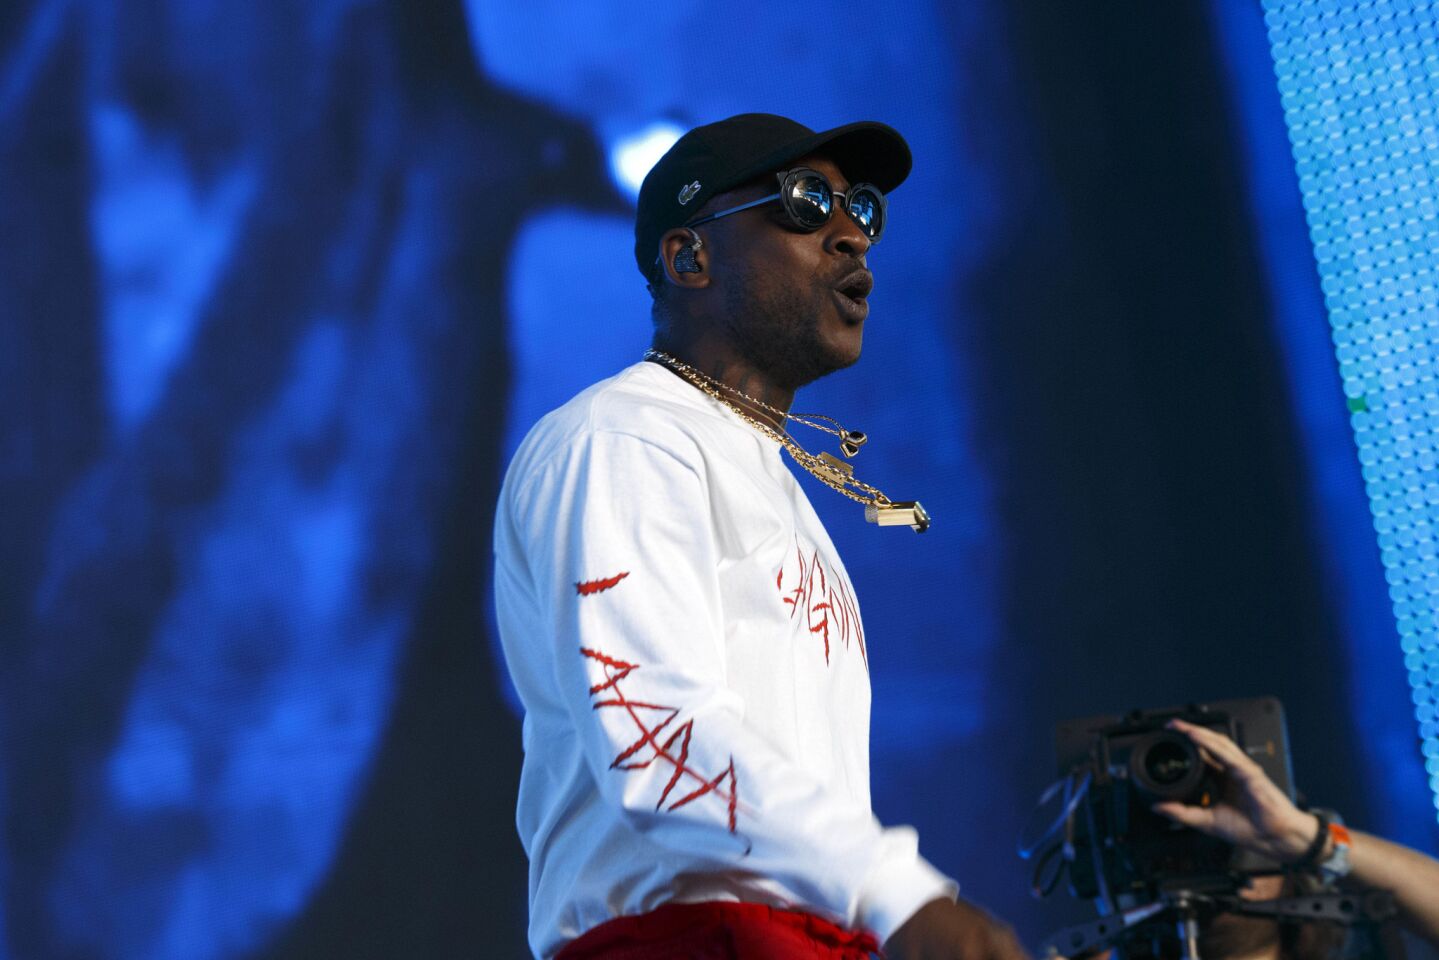 Grime artist and songwriter Skepta, Joseph Junior Adenuga, performs during weekend one of the three-day Coachella Valley Music and Arts Festival at the Empire Polo Grounds on Sunday, April 16, 2017 in Indio, Calif. (Patrick T. Fallon/ For The Los Angeles Times)